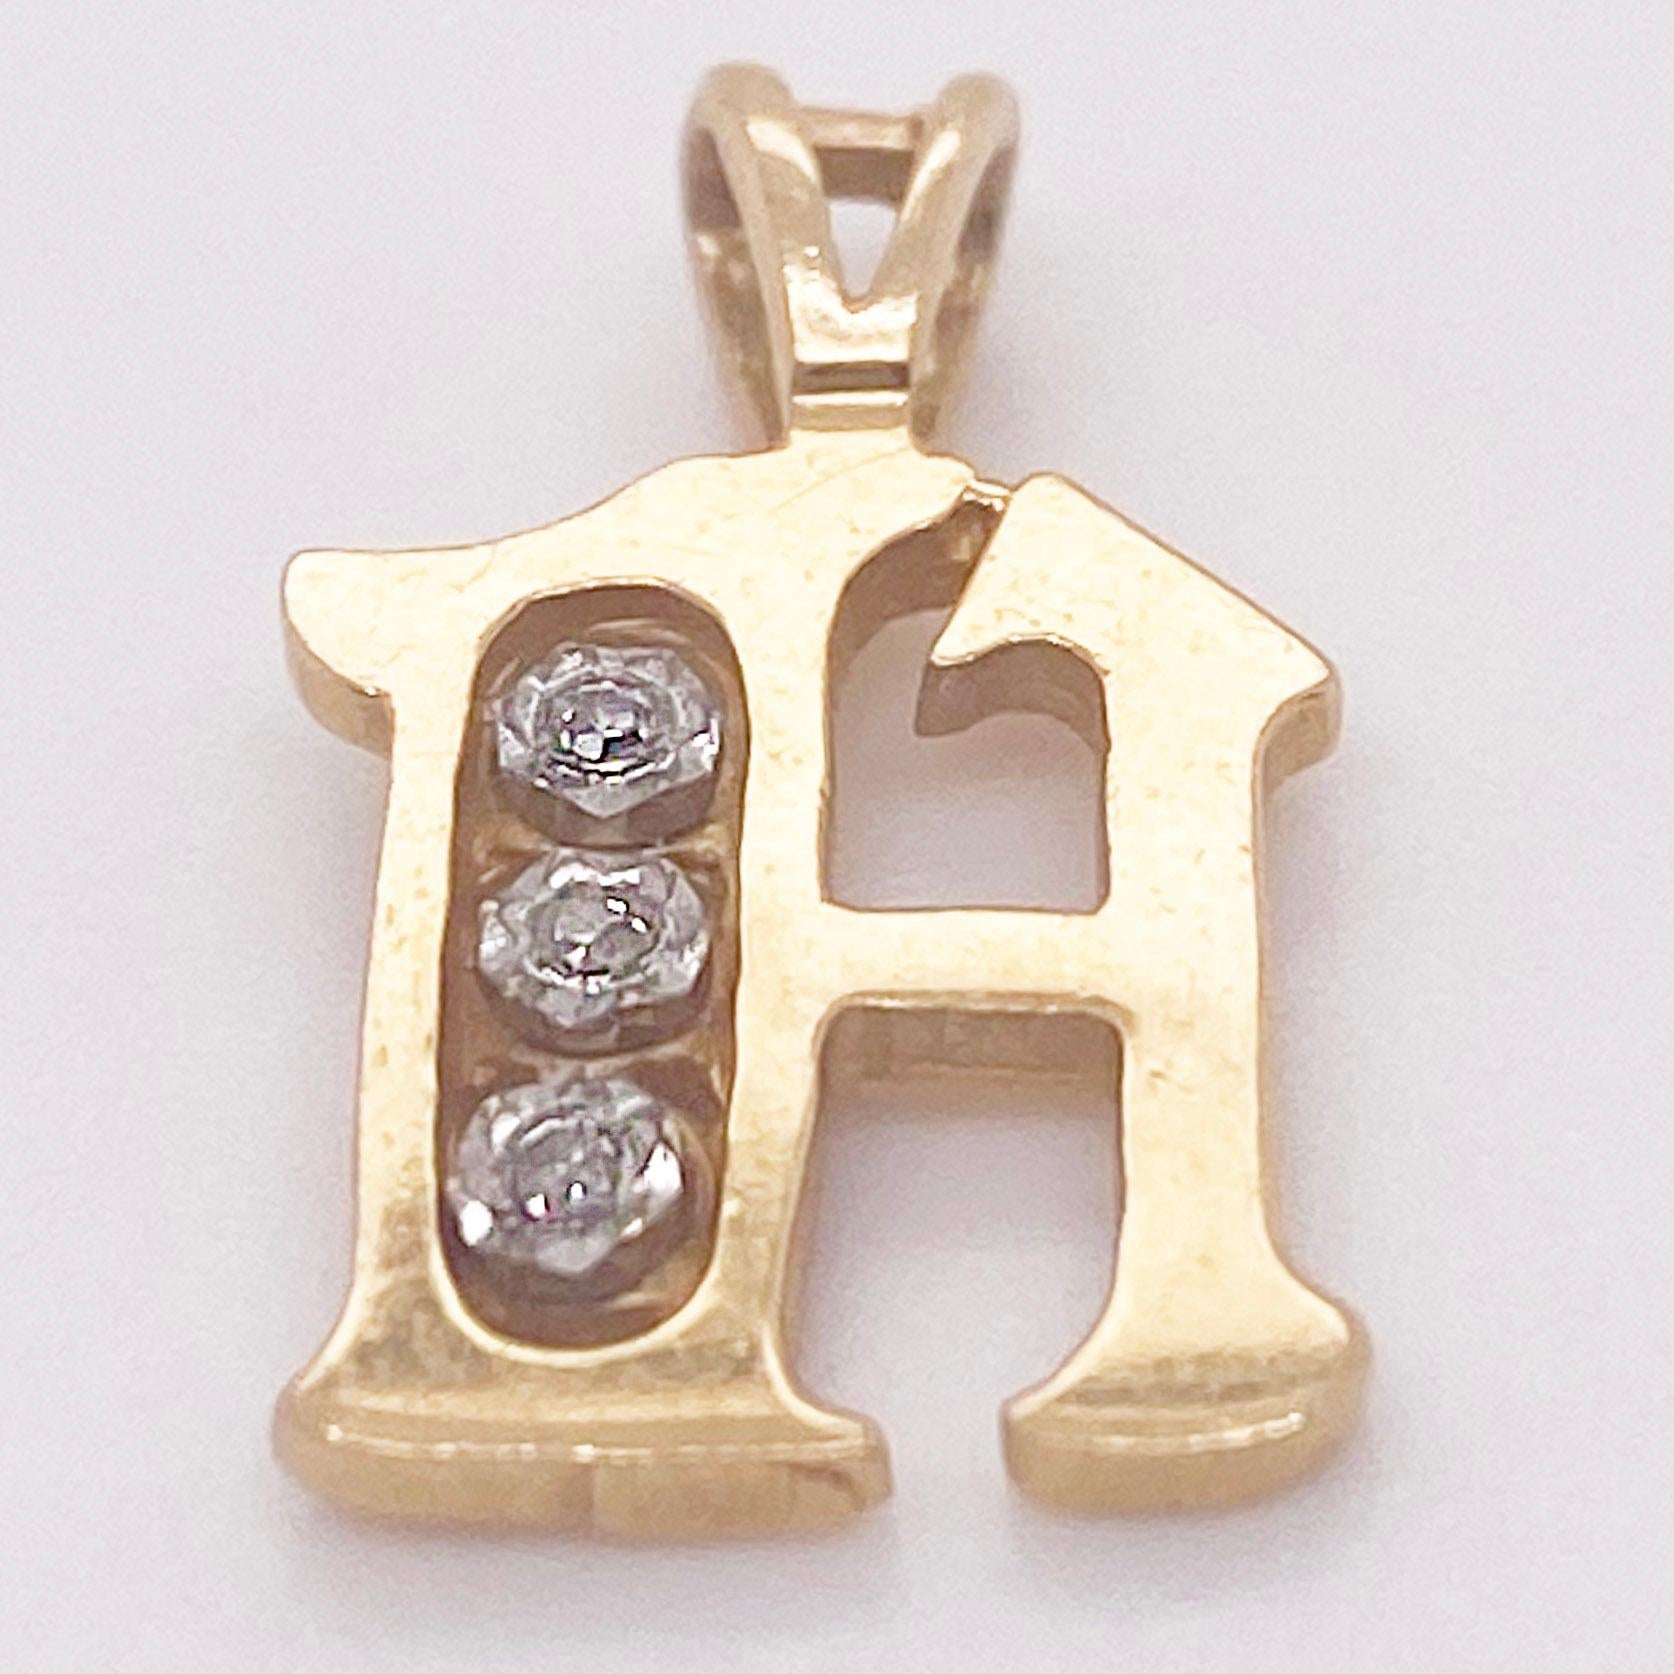 The details for this beautiful necklace are listed below:
Metal Quality: 14K Yellow Gold
Pendant Style: H Initial
Measurements of Pendant: 17.3 x 9.5 millimeters
Diamond Number: 3
Diamond Shape: Round
Diamond Clarity: VS2 (Excellent, Eye